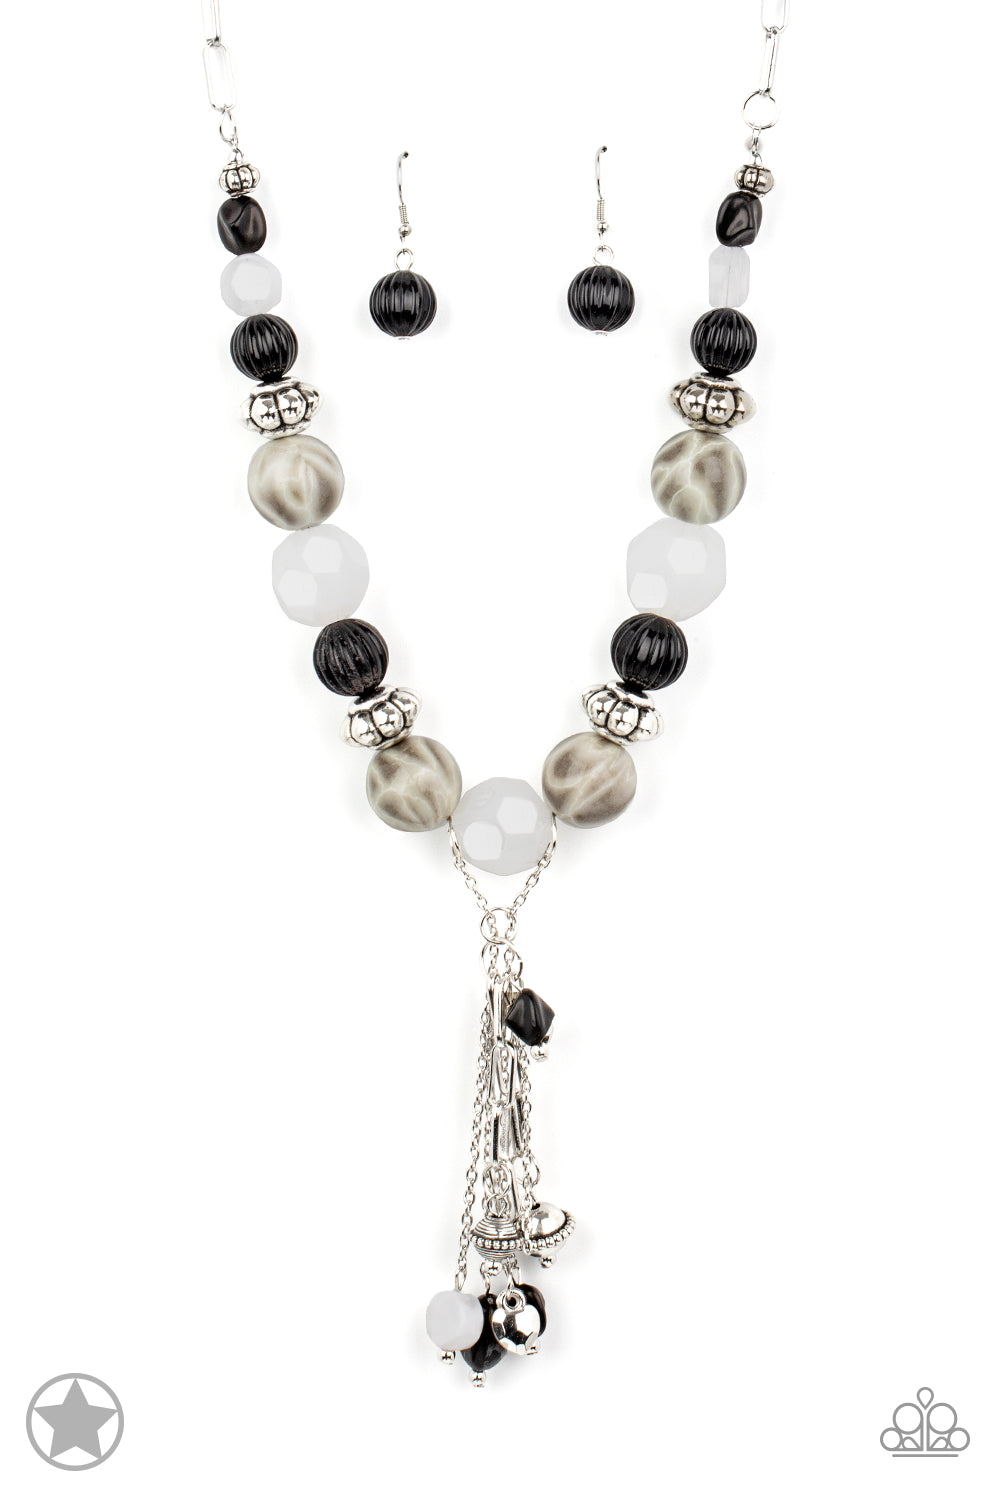 shop-sassy-affordable- marble-and-black-beads-with-cluster-blockbust-paparazzi-accessories